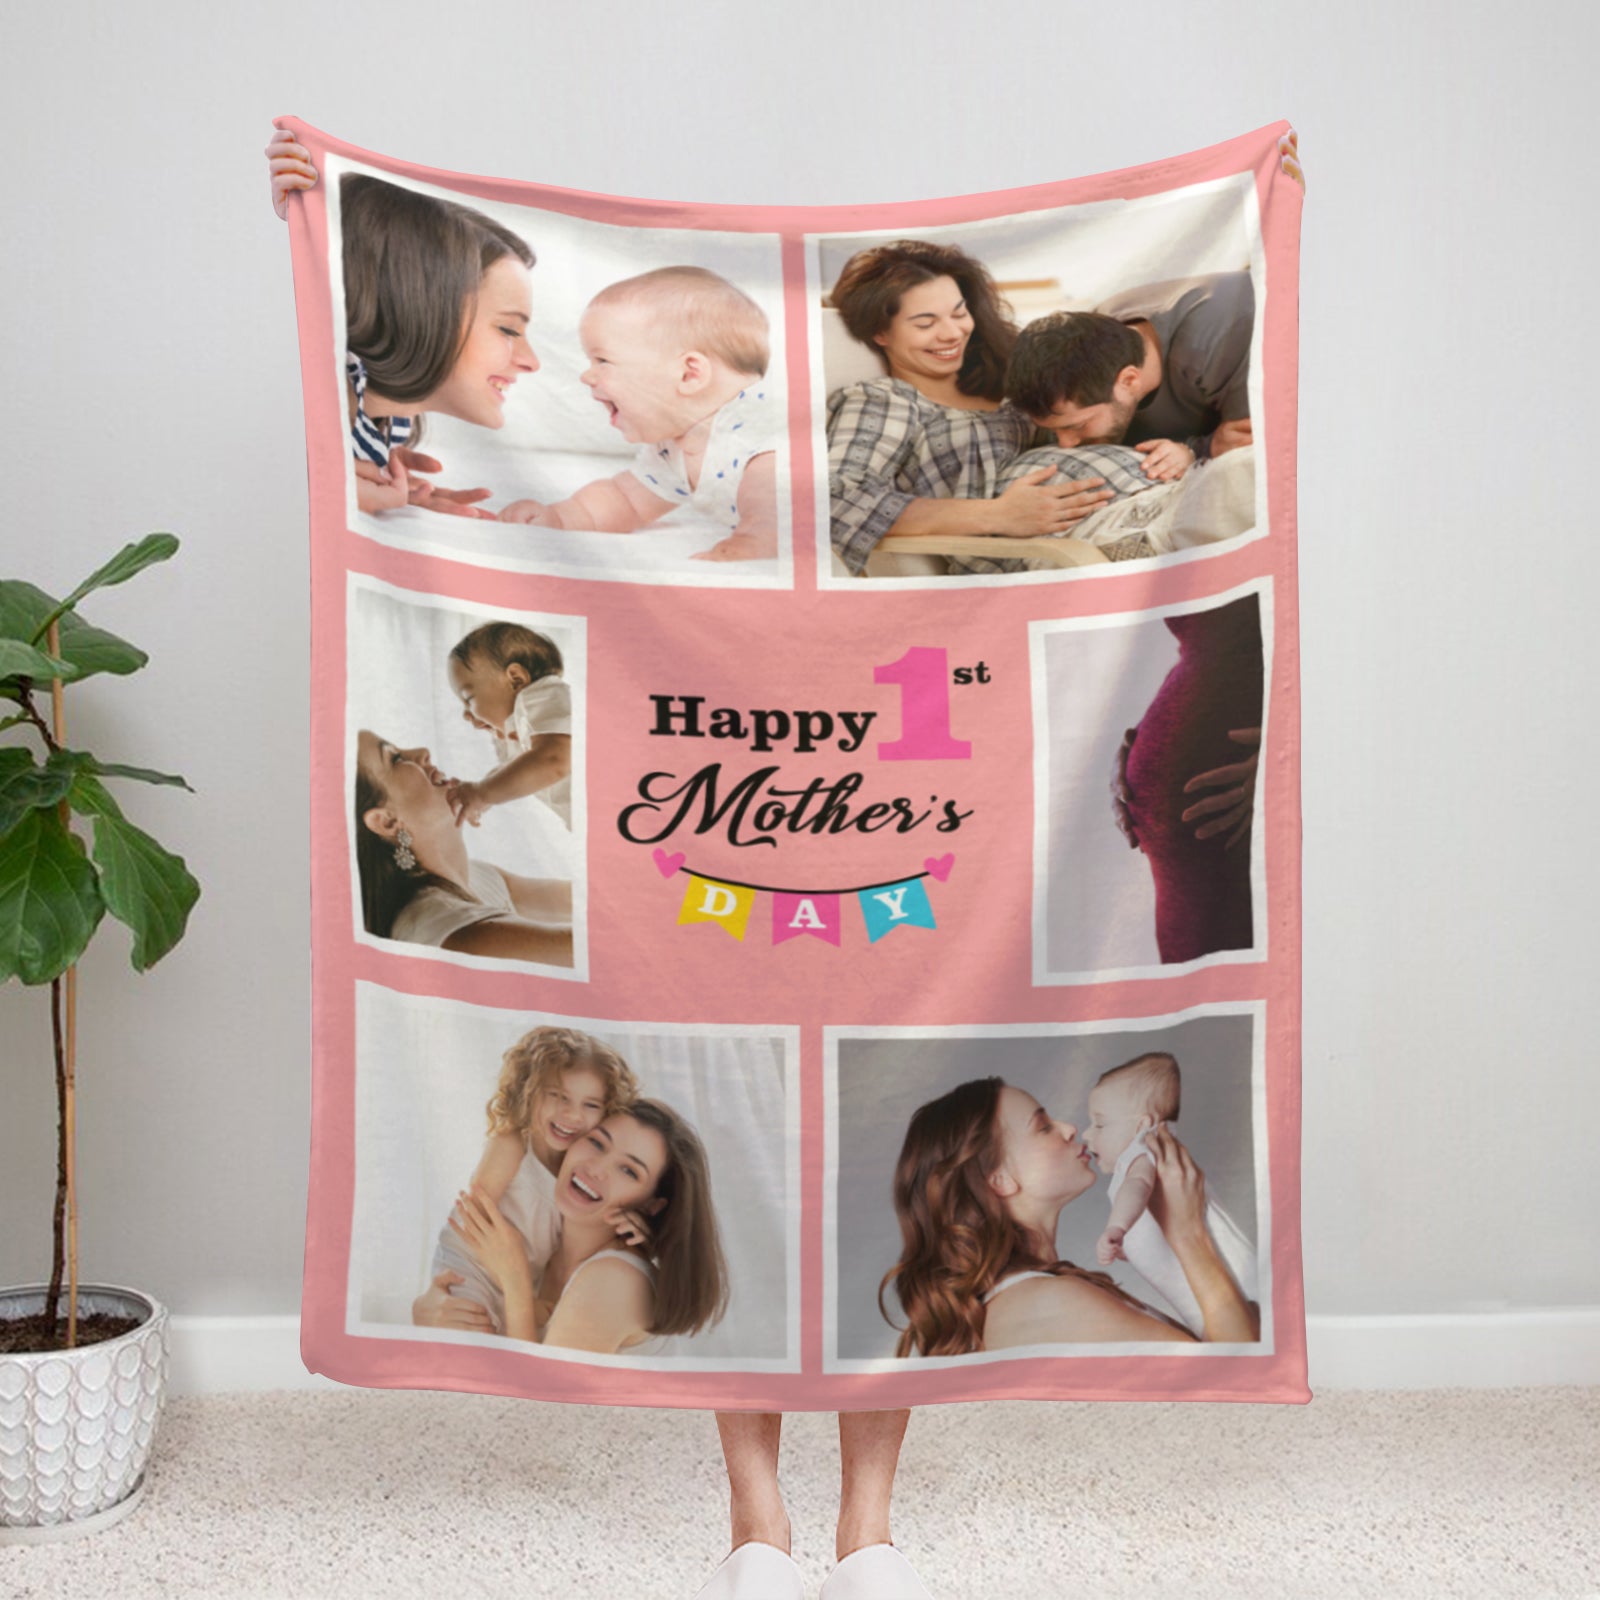 Personalized "Happy1'st mother's Day" blanket with photo-Custom - Mother's Day Gift For Mom - colorfulcustom